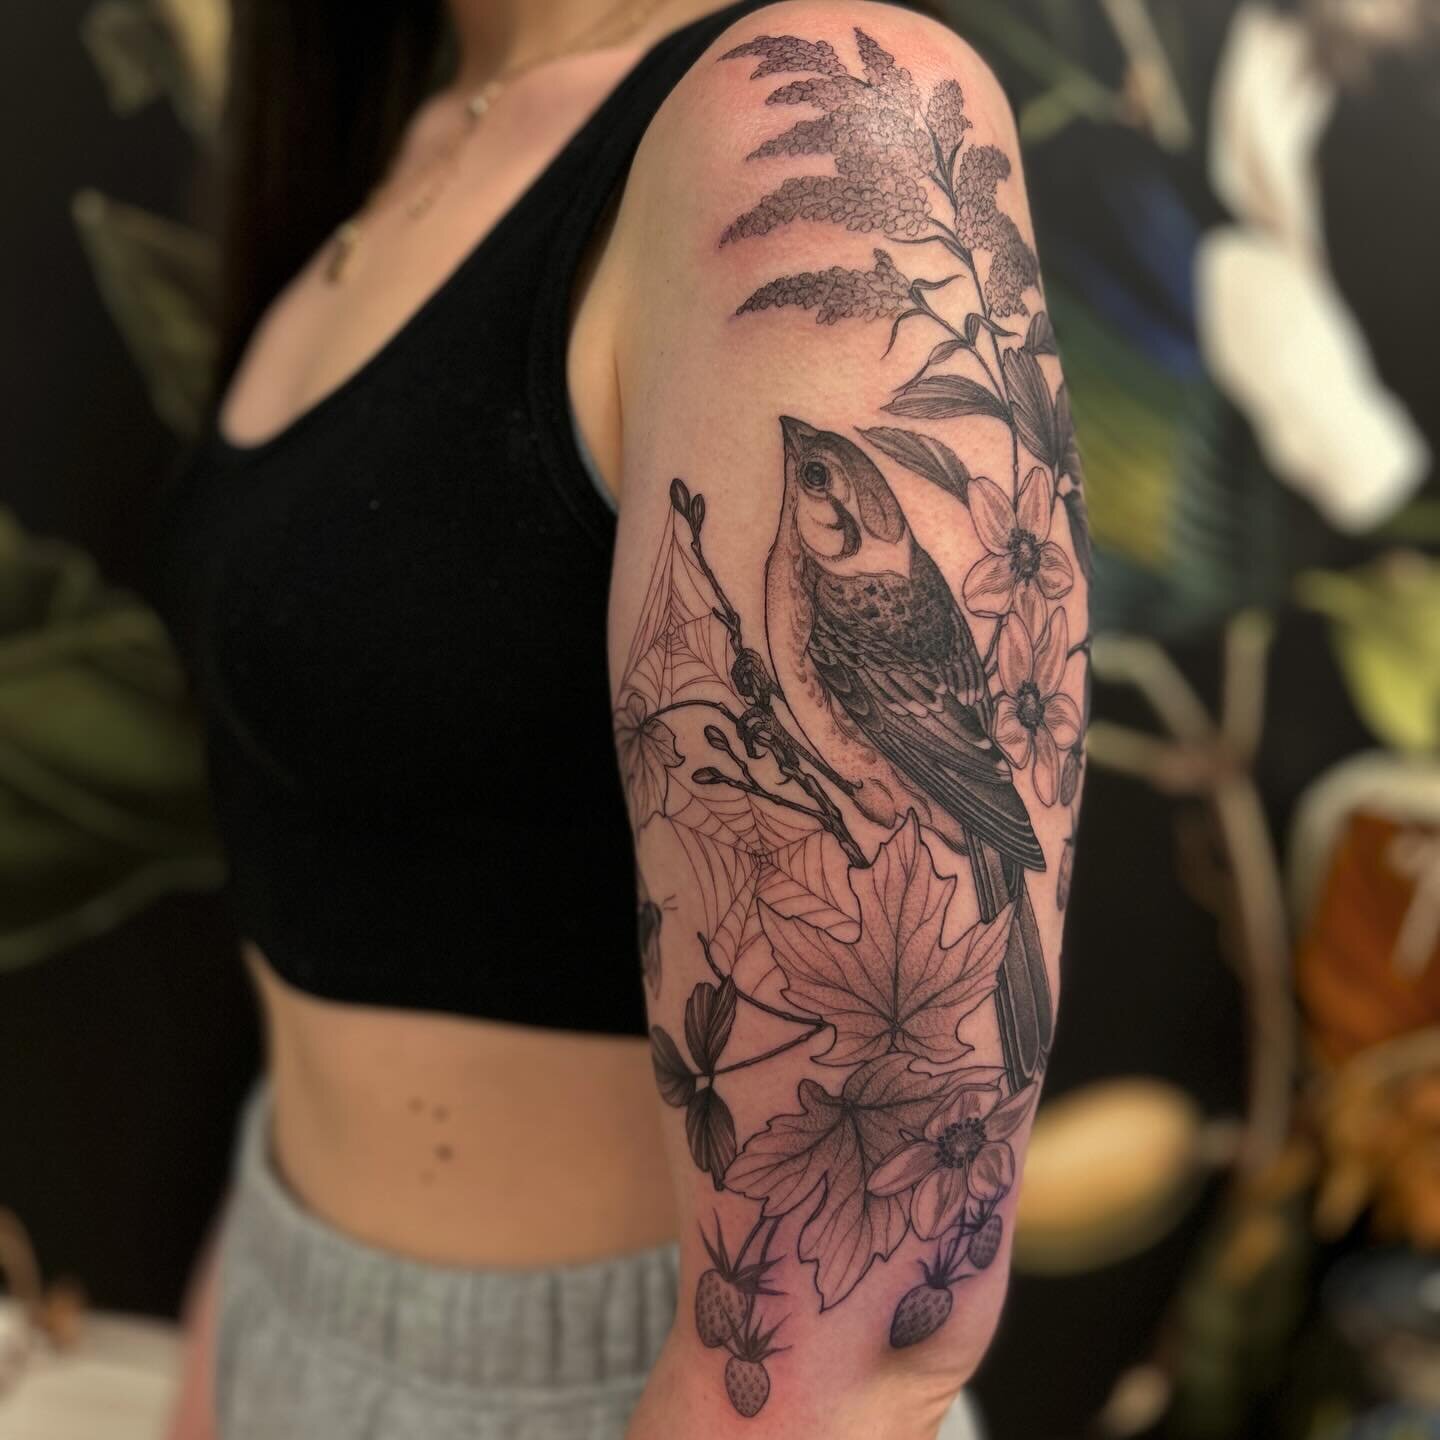 Made in a day for Izzy. American tree sparrow, strawberries, goldenrod, maple 🍁🍓
@springfevertattoo